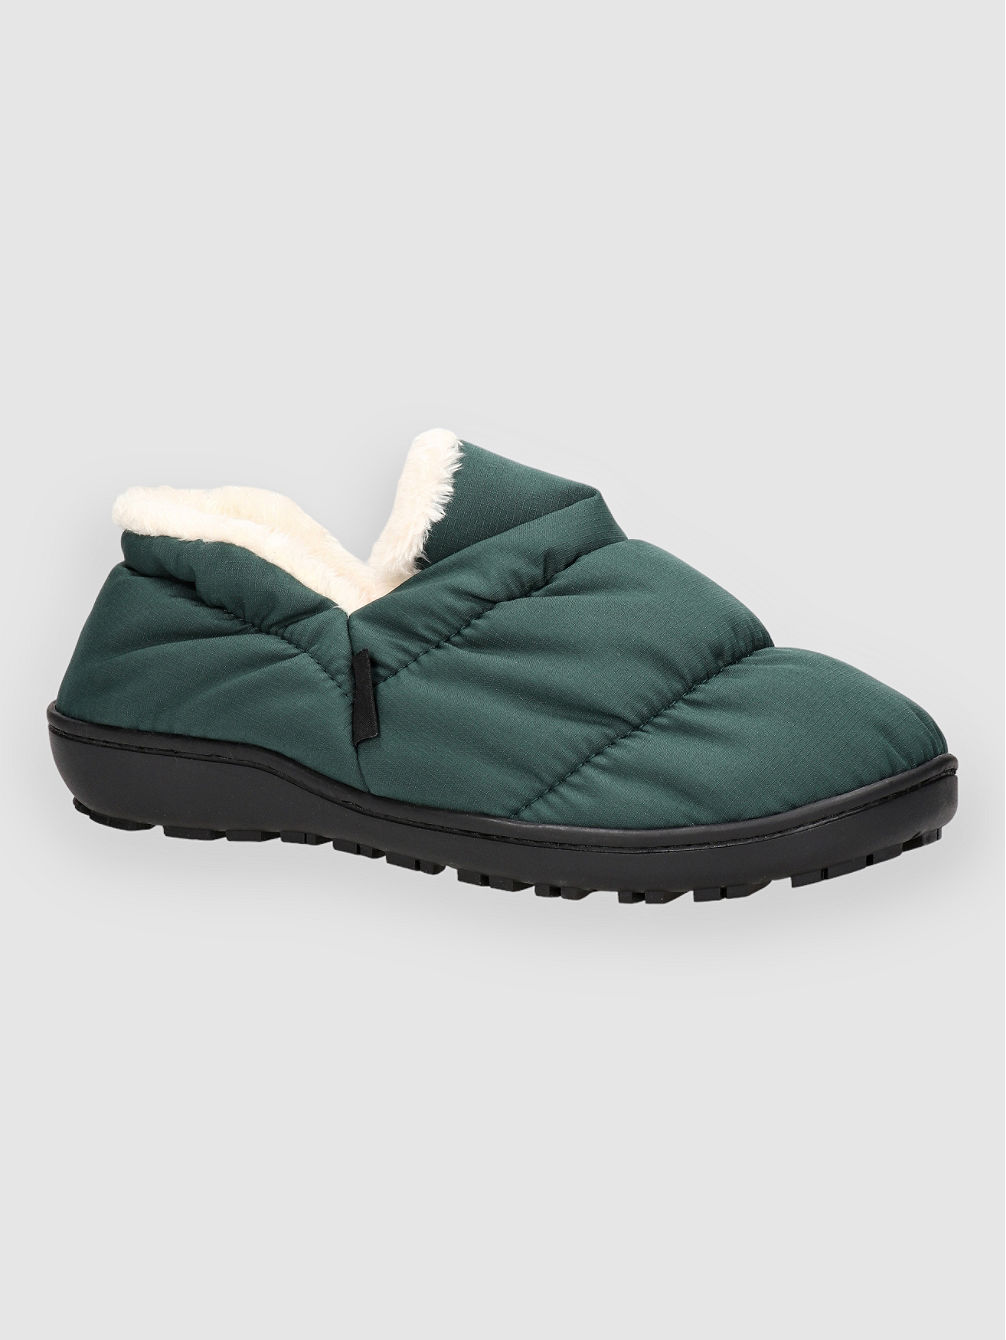 Cloudtouch Slipper Winter Shoes